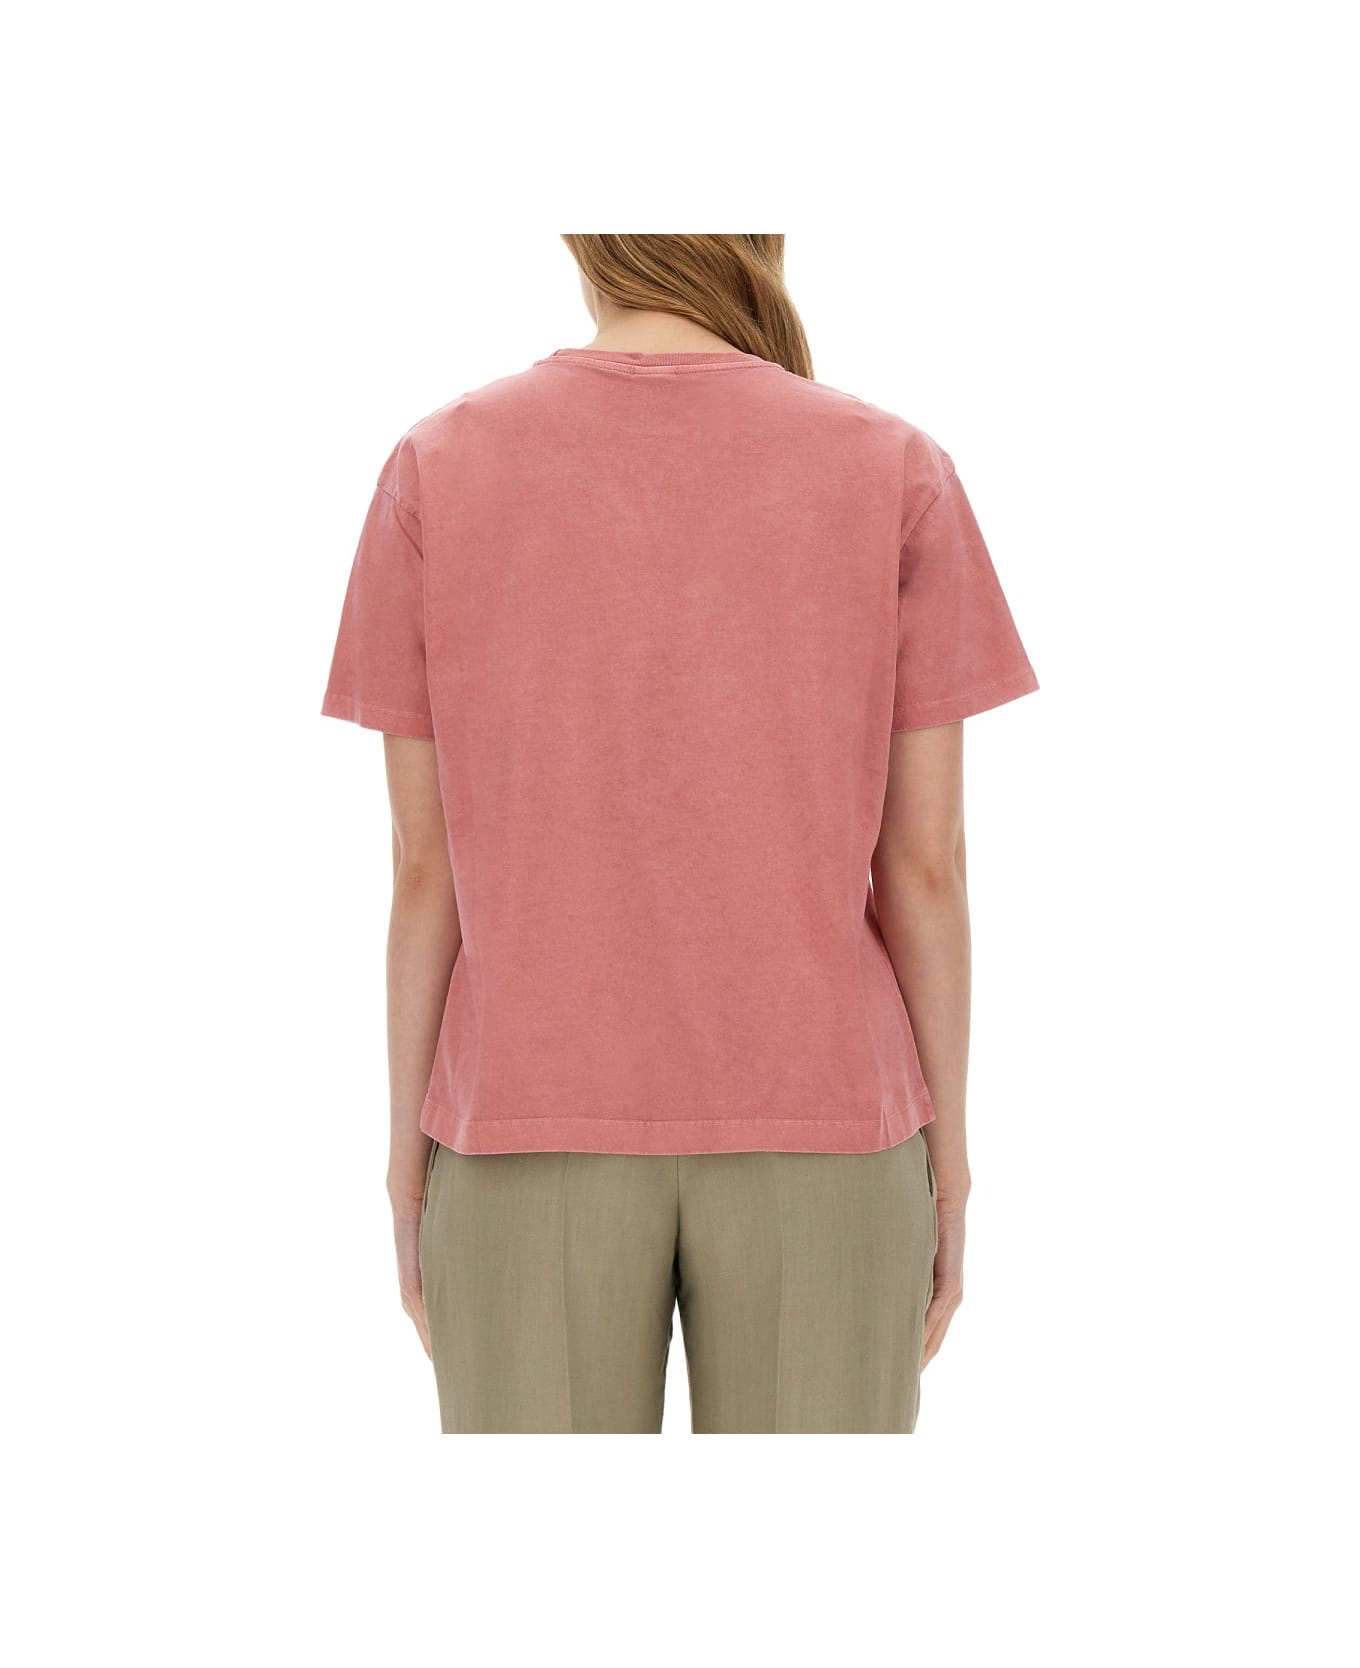 PS by Paul Smith Summer Sun Print T-shirt - PINK Tシャツ